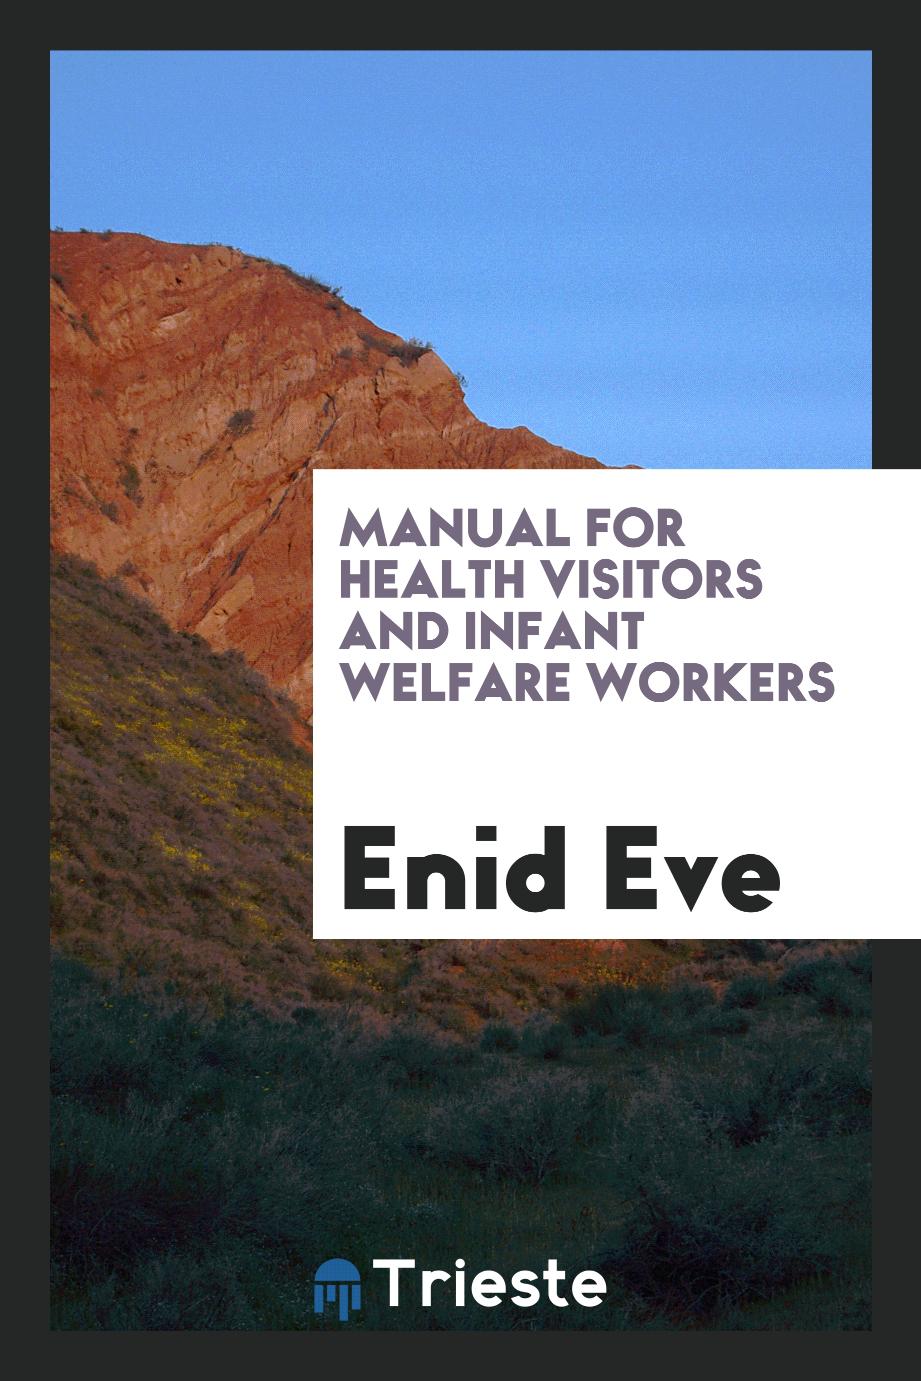 Manual for health visitors and infant welfare workers